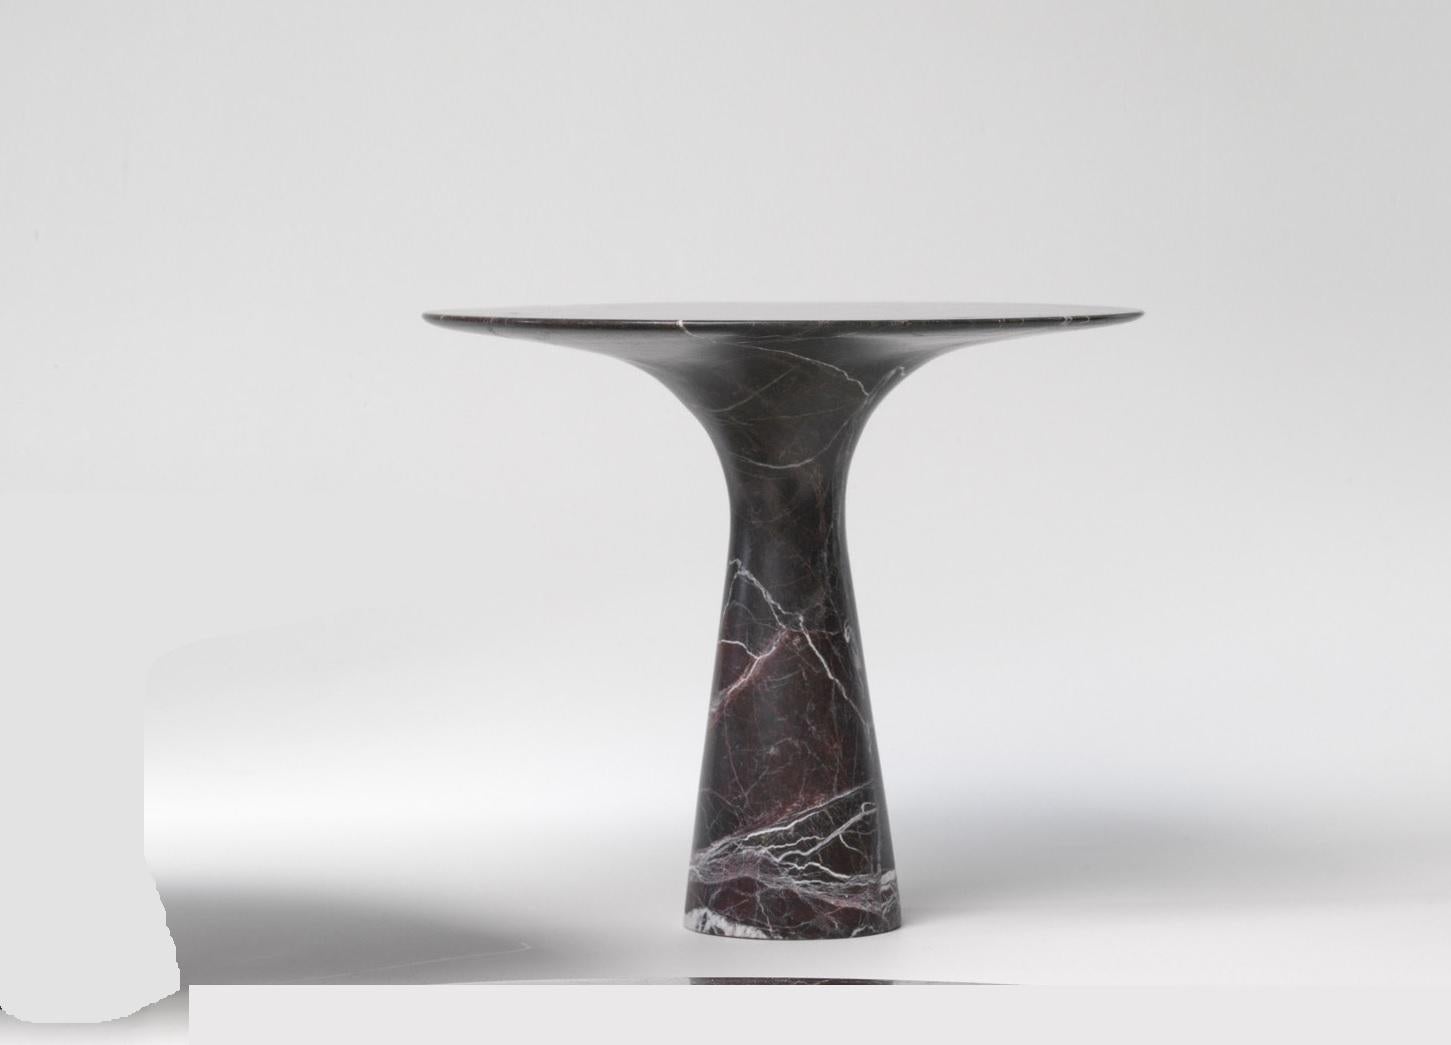 Refined Contemporary Marble 03 Rosso Levanto Marble Cake Stand
Signed by Leo Aerts.
Dimensions: Diameter 26 x H 22.5 cm 
Material: Rosso Lepanto Marble
Technique: Polished, Carved. 
Available in Marble: Kyknos, Bianco Statuarietto, Grey Saint